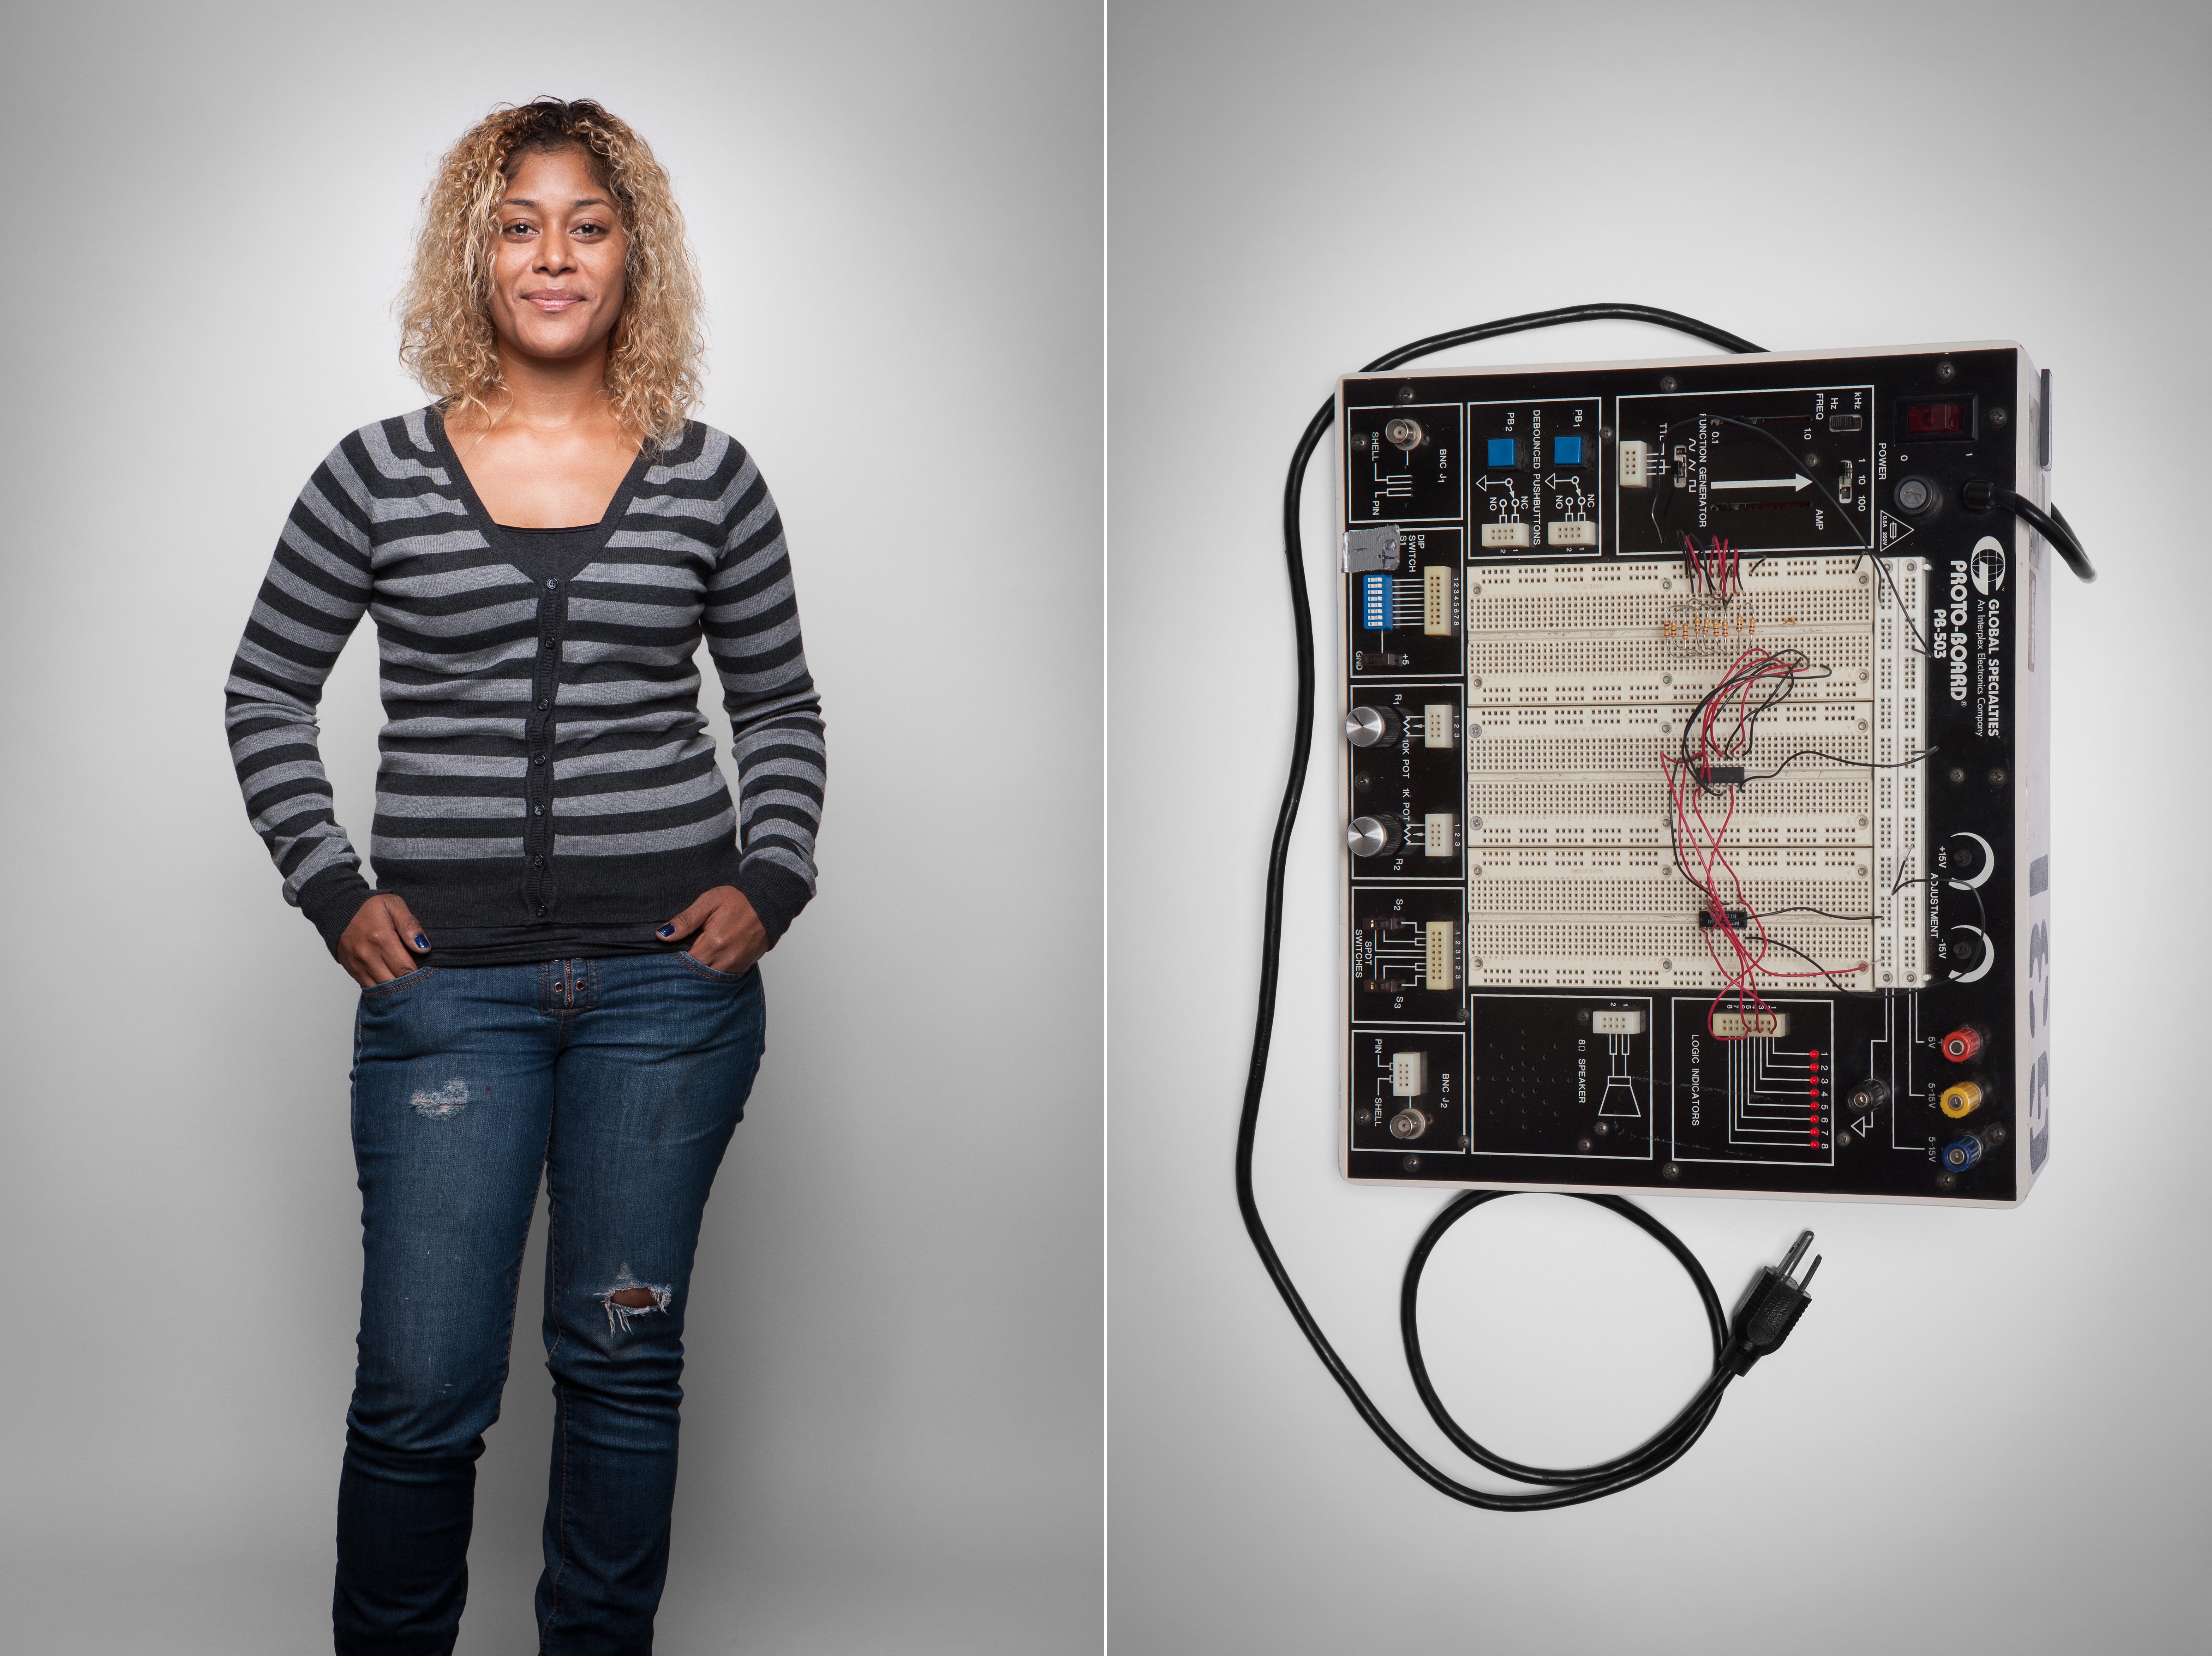 Electronics Worker with her Tool Picture 